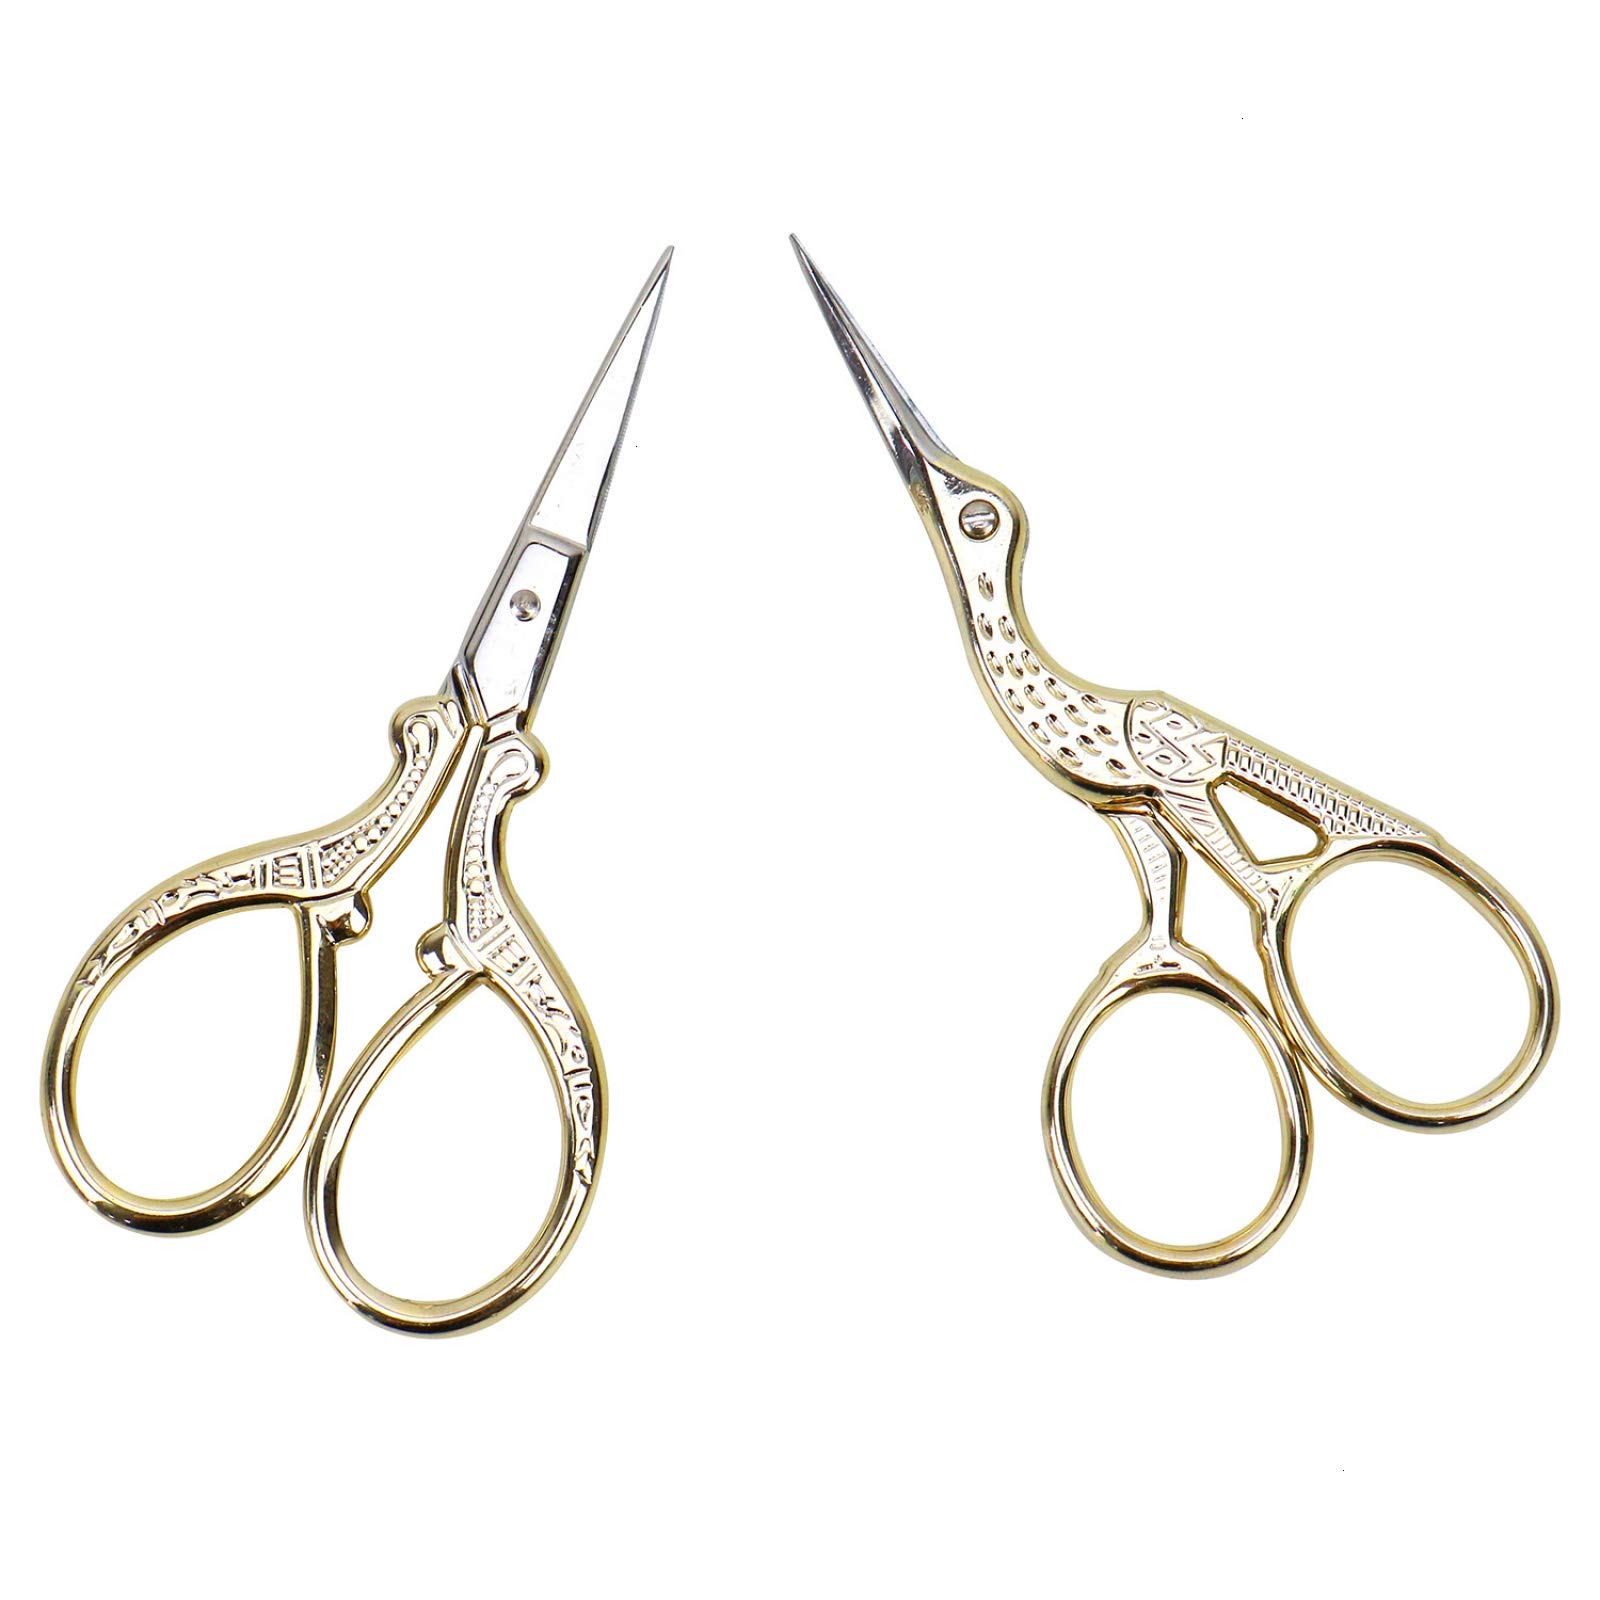 AQUEENLY Embroidery Scissors, Stainless Steel Sharp Stork Scissors for  Sewing Crafting, Art Work, Threading, Needlework - DIY